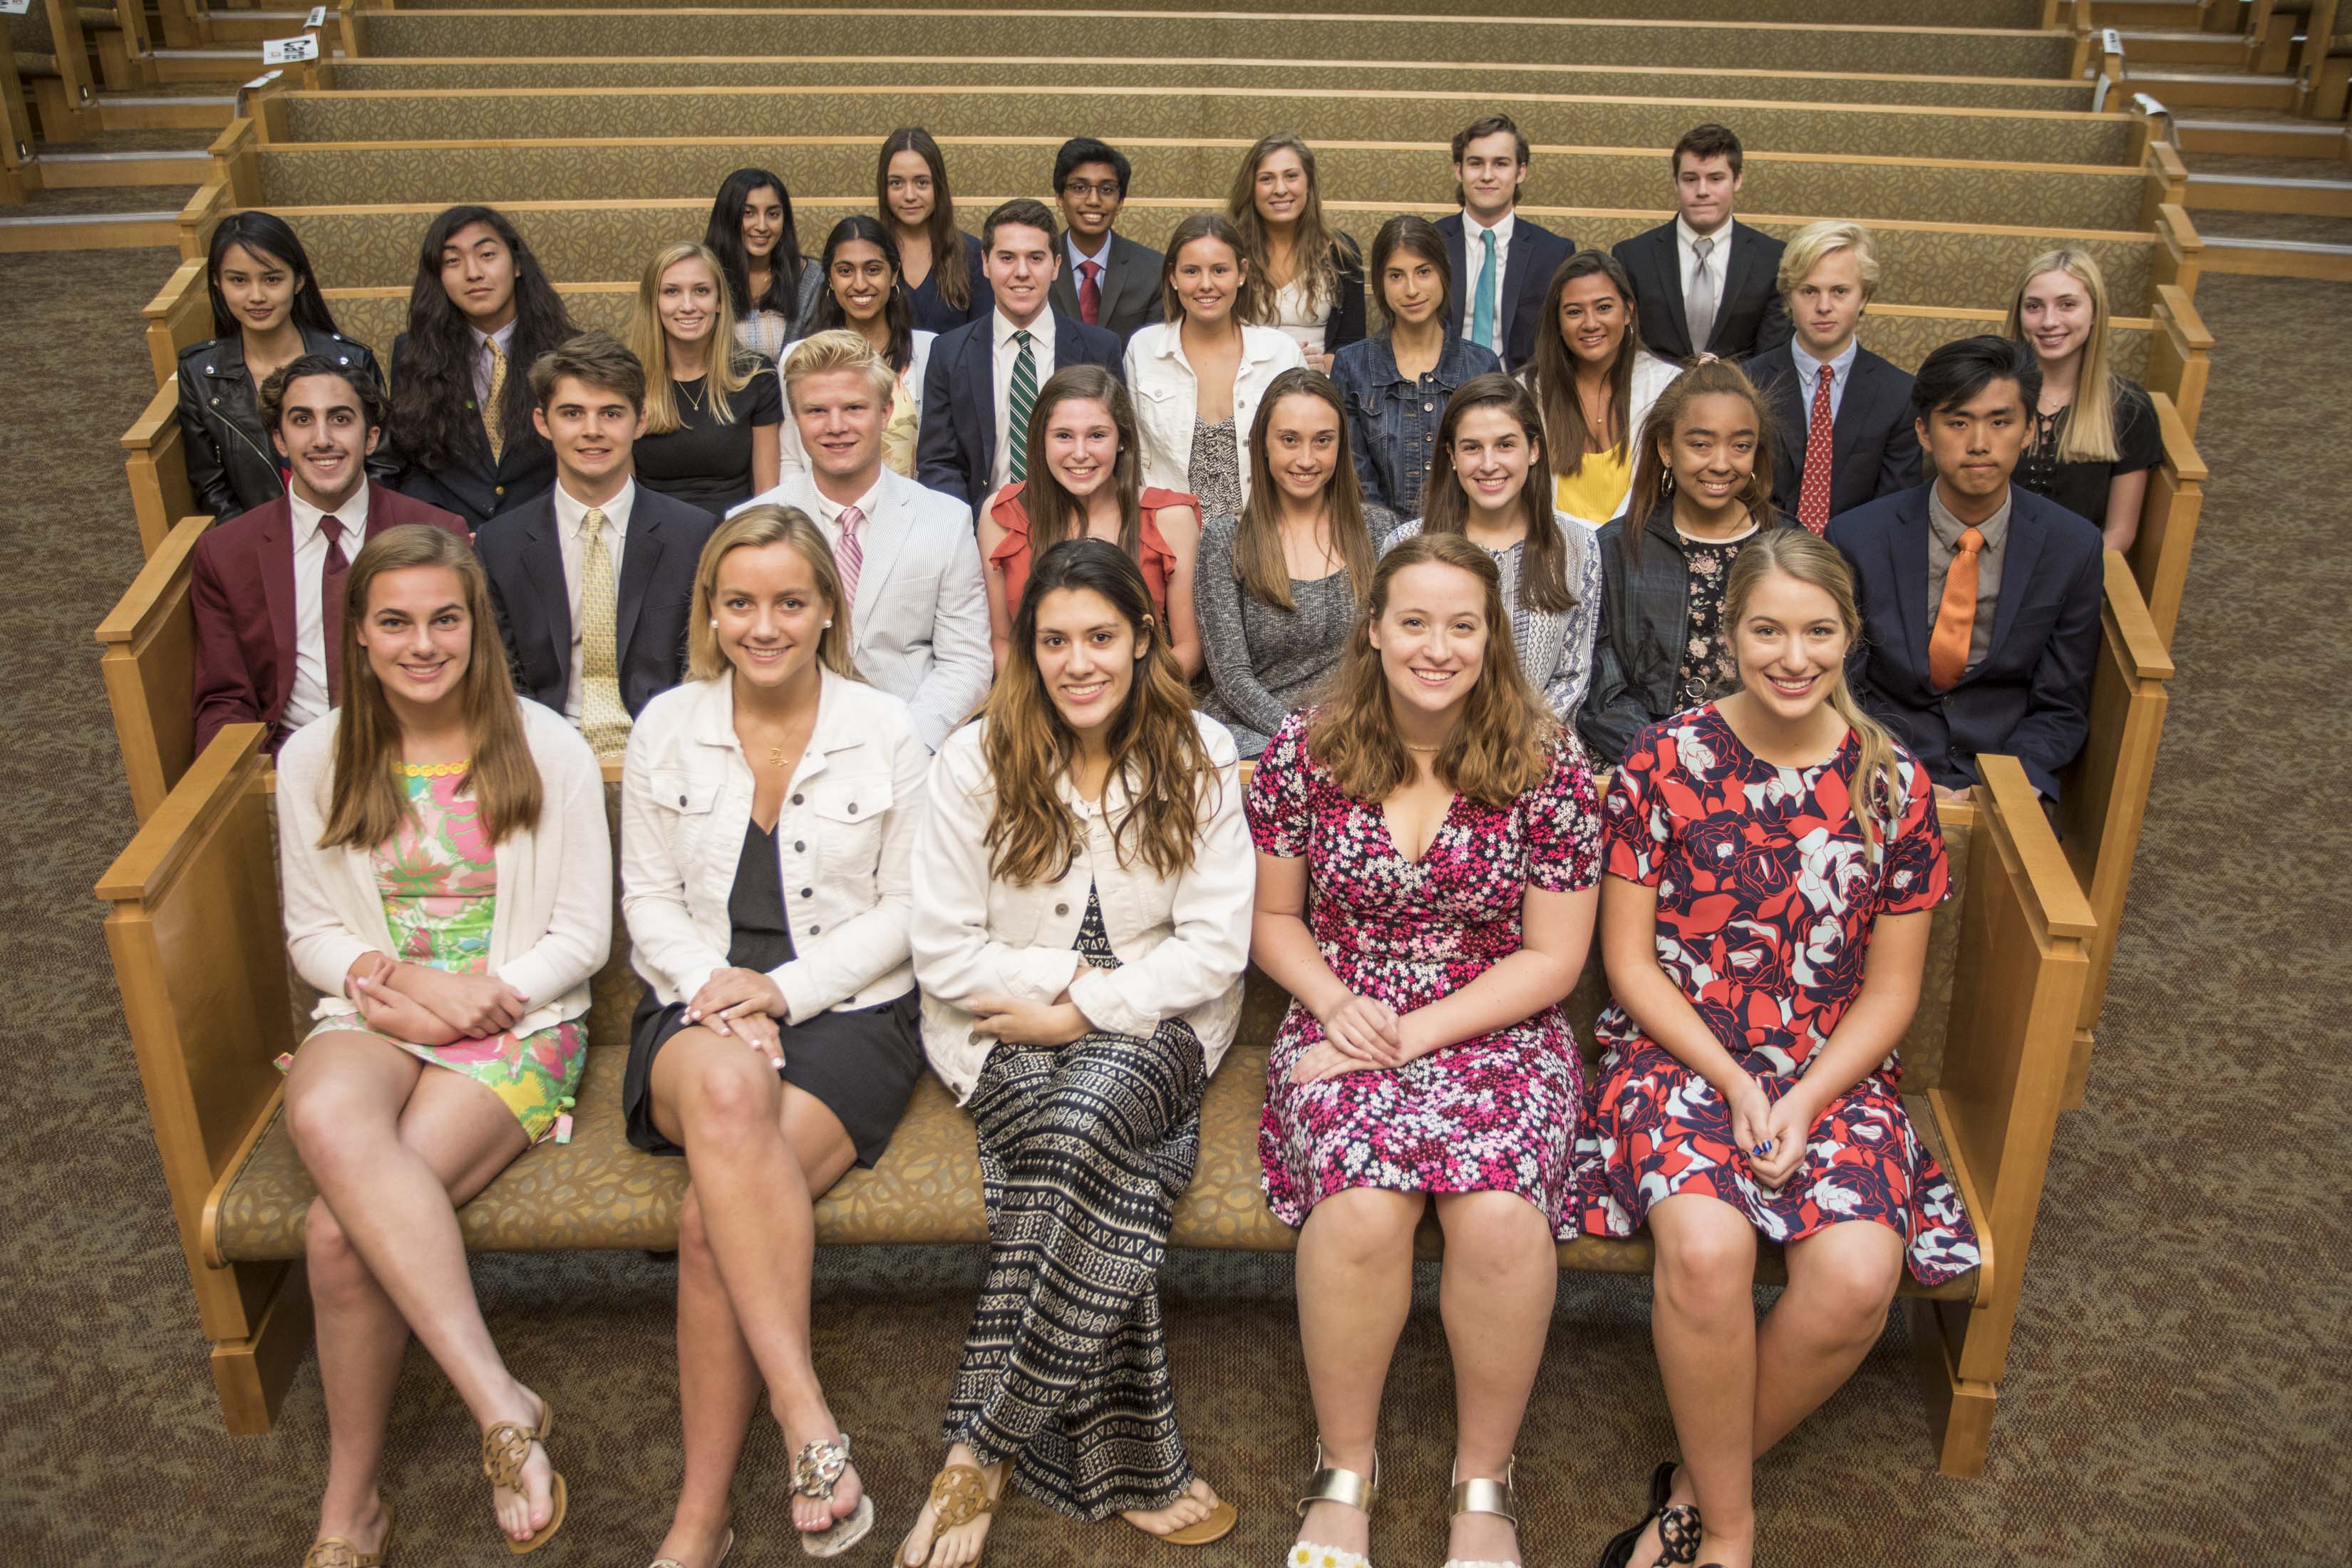 Twenty nine MICDS students from the Class of 2019 were inducted into the Cum Laude Society on April 12.